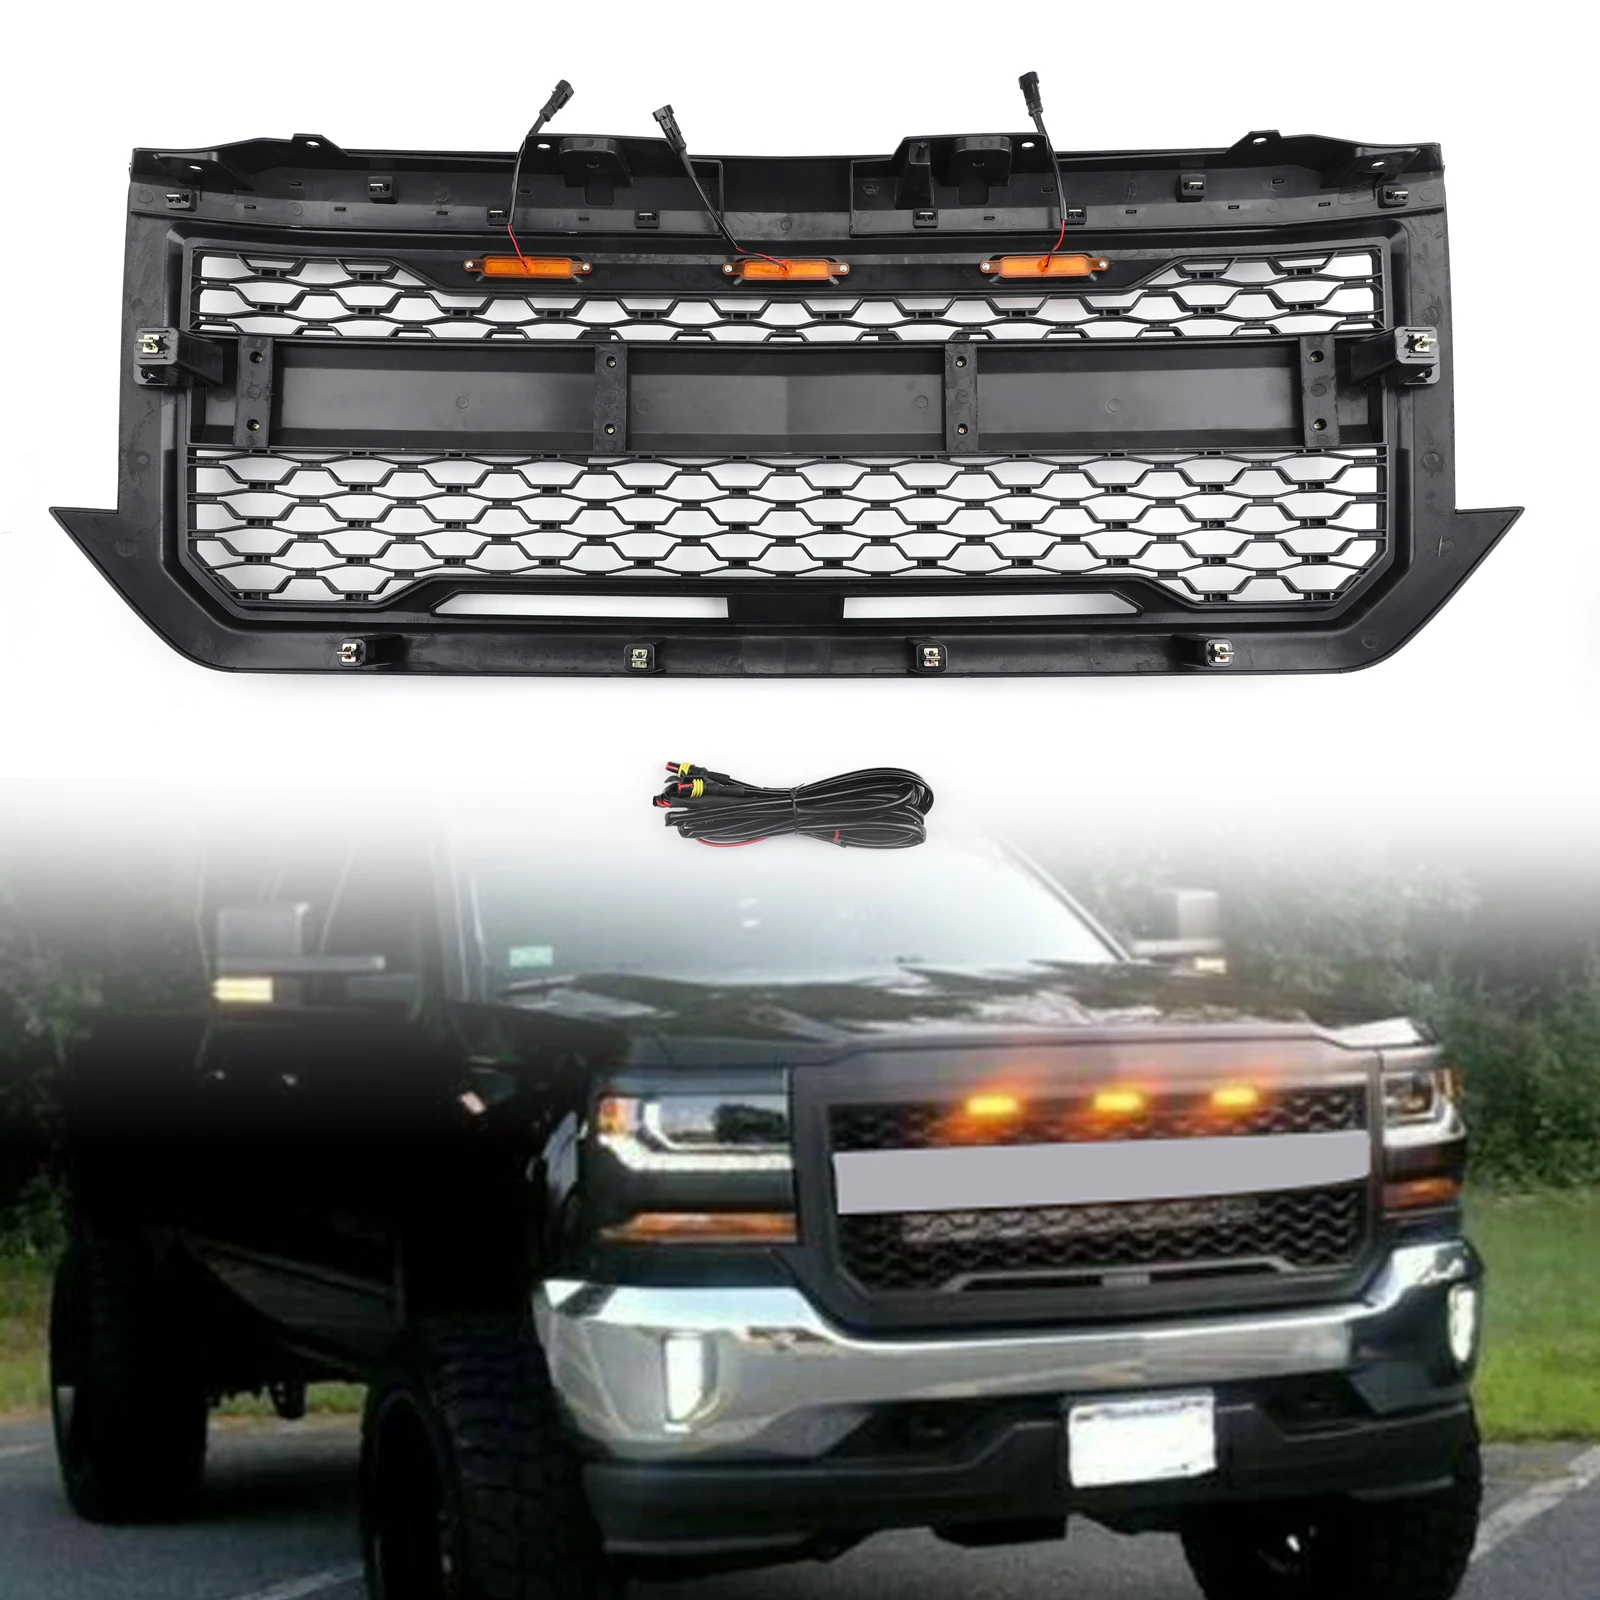 

Areyourshop LED Light Front Bumper Grill Grille Chevrolet Silverado 1500 2016 2017 2018 With Letter, Black